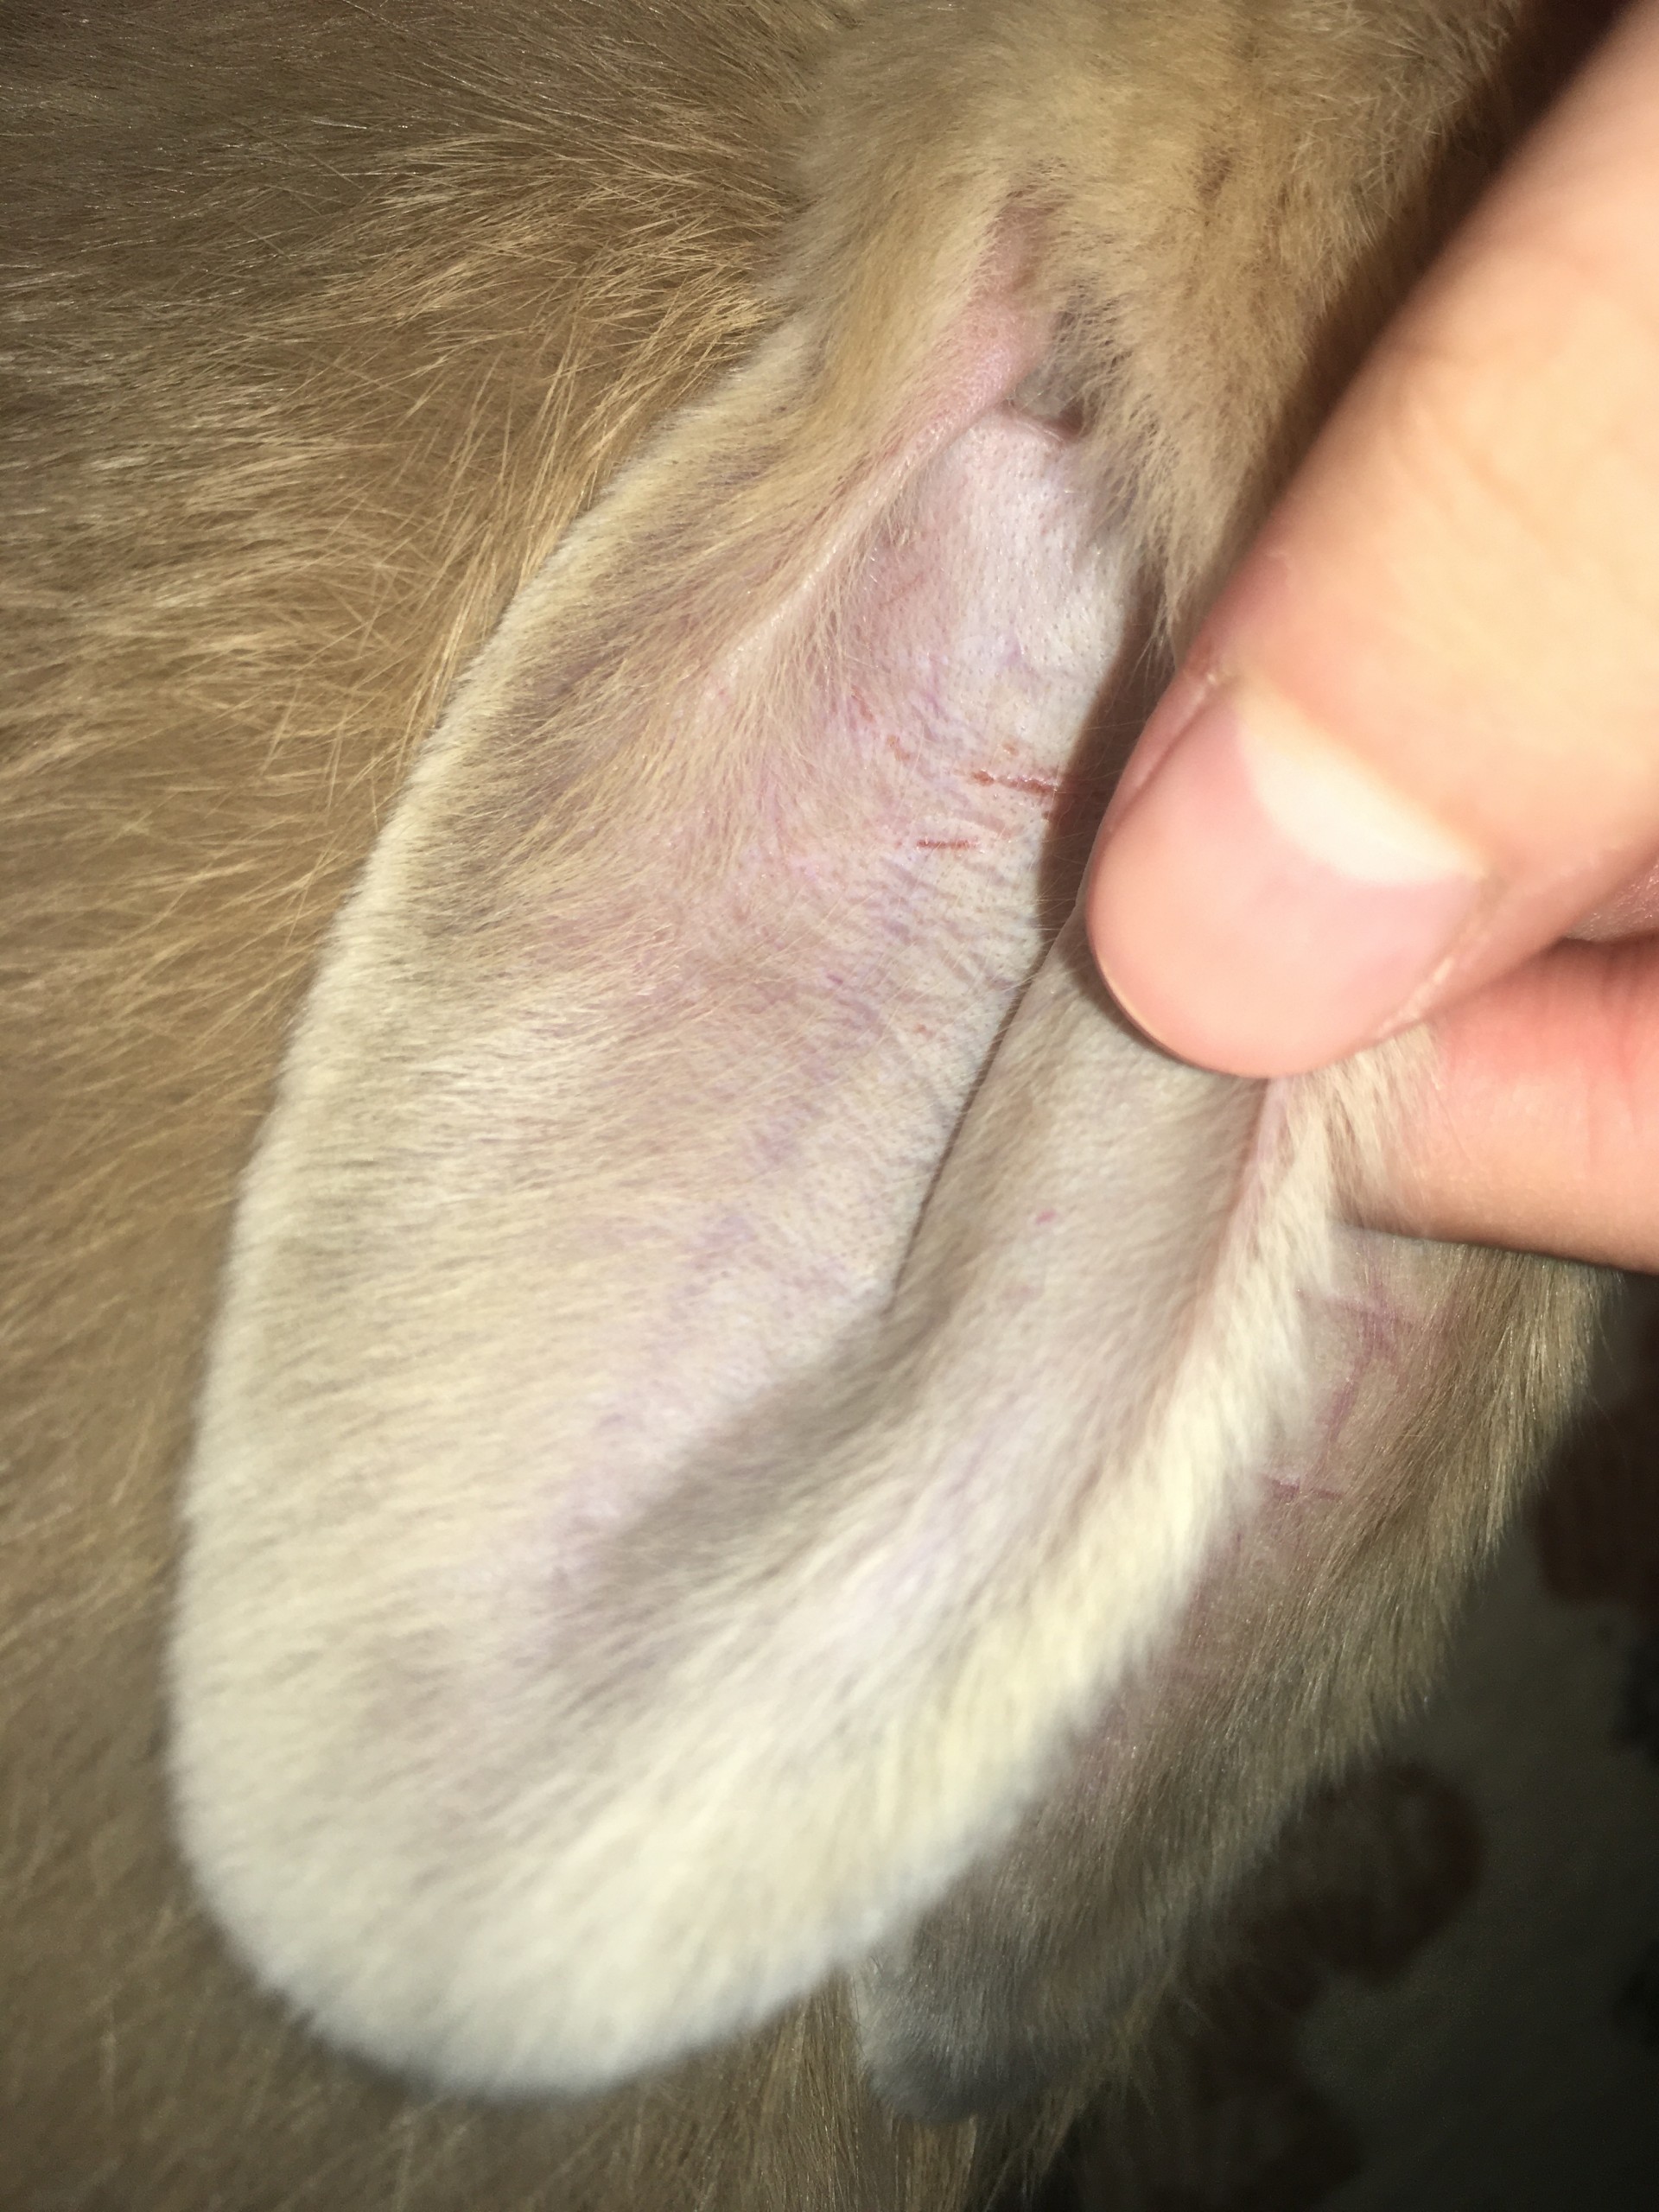 How to Treat Ear Mites in Rabbits (Naturally)